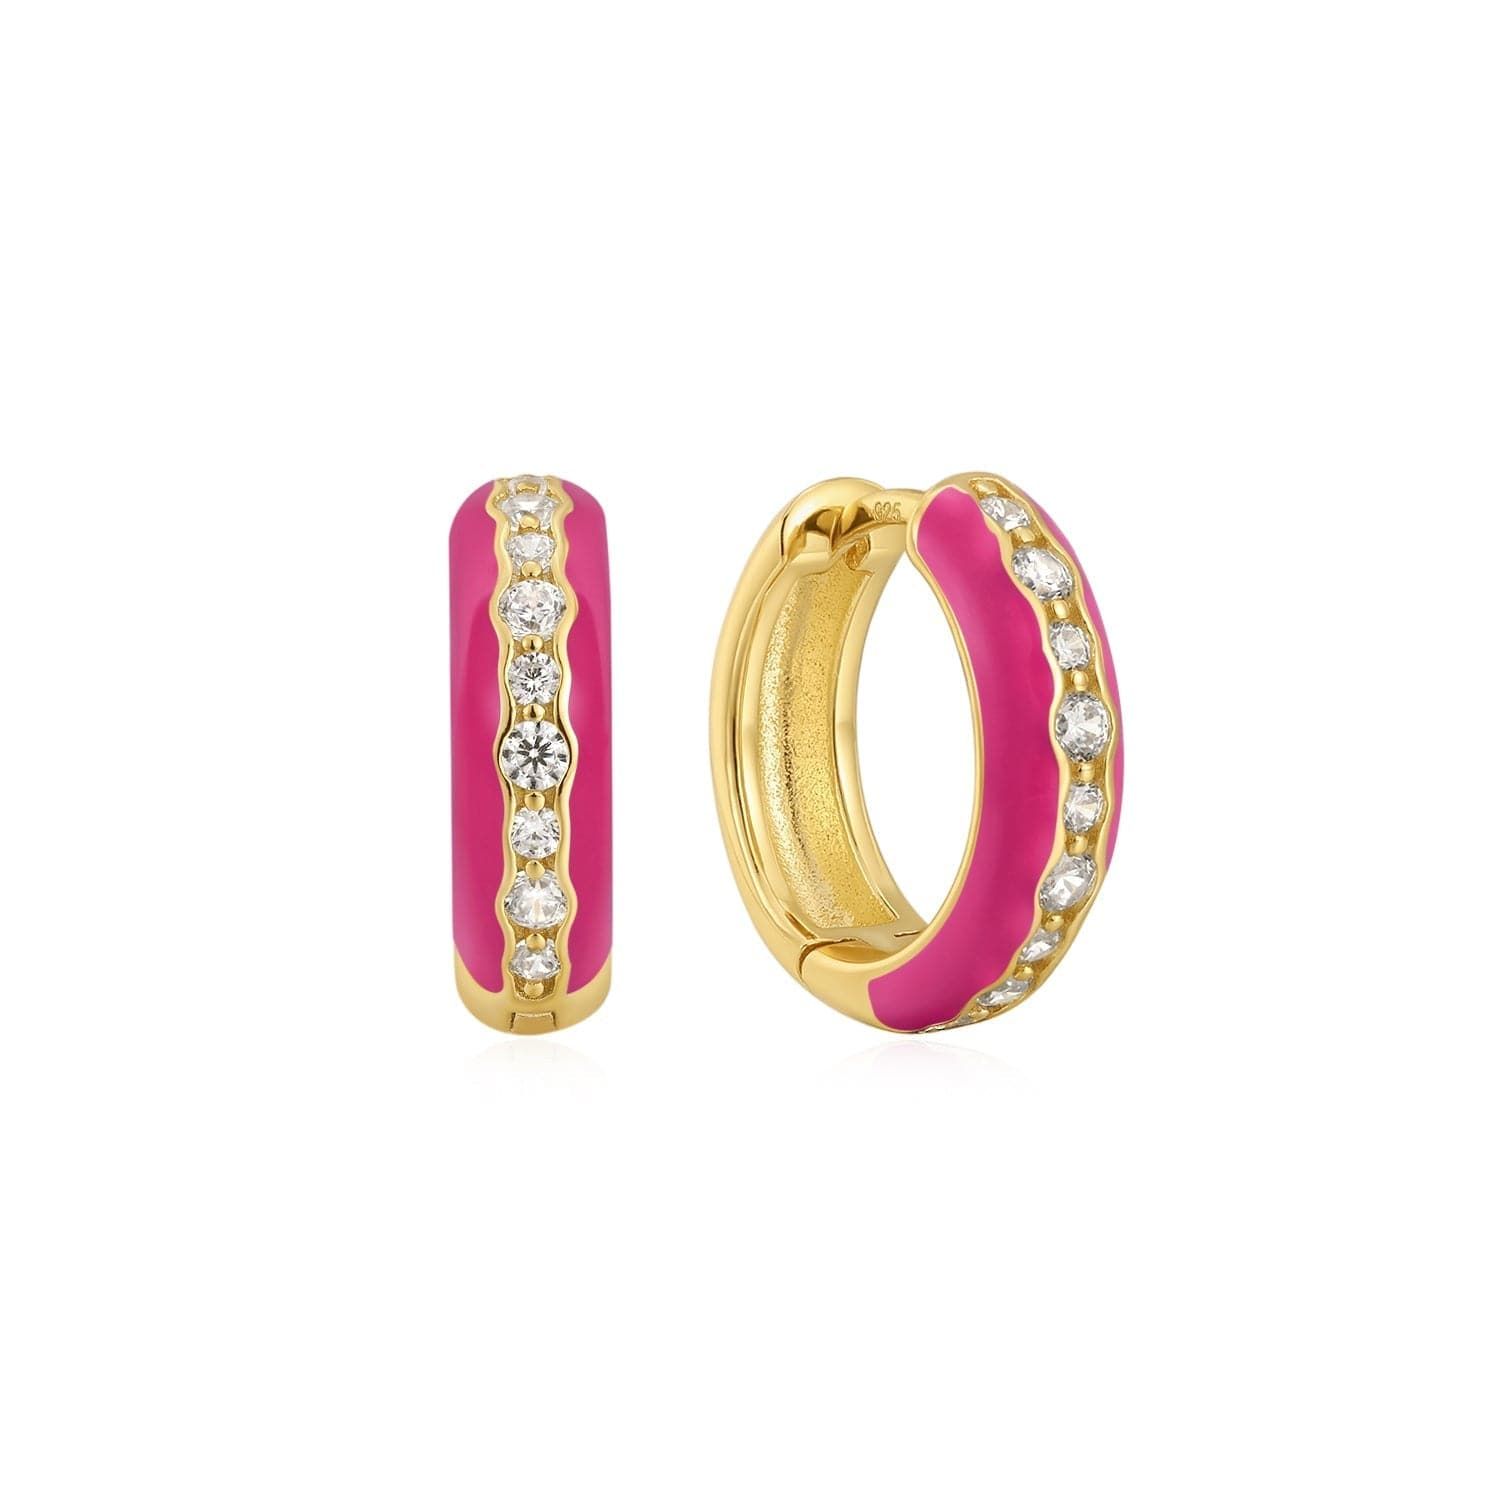 a pair of pink and gold hoop earrings